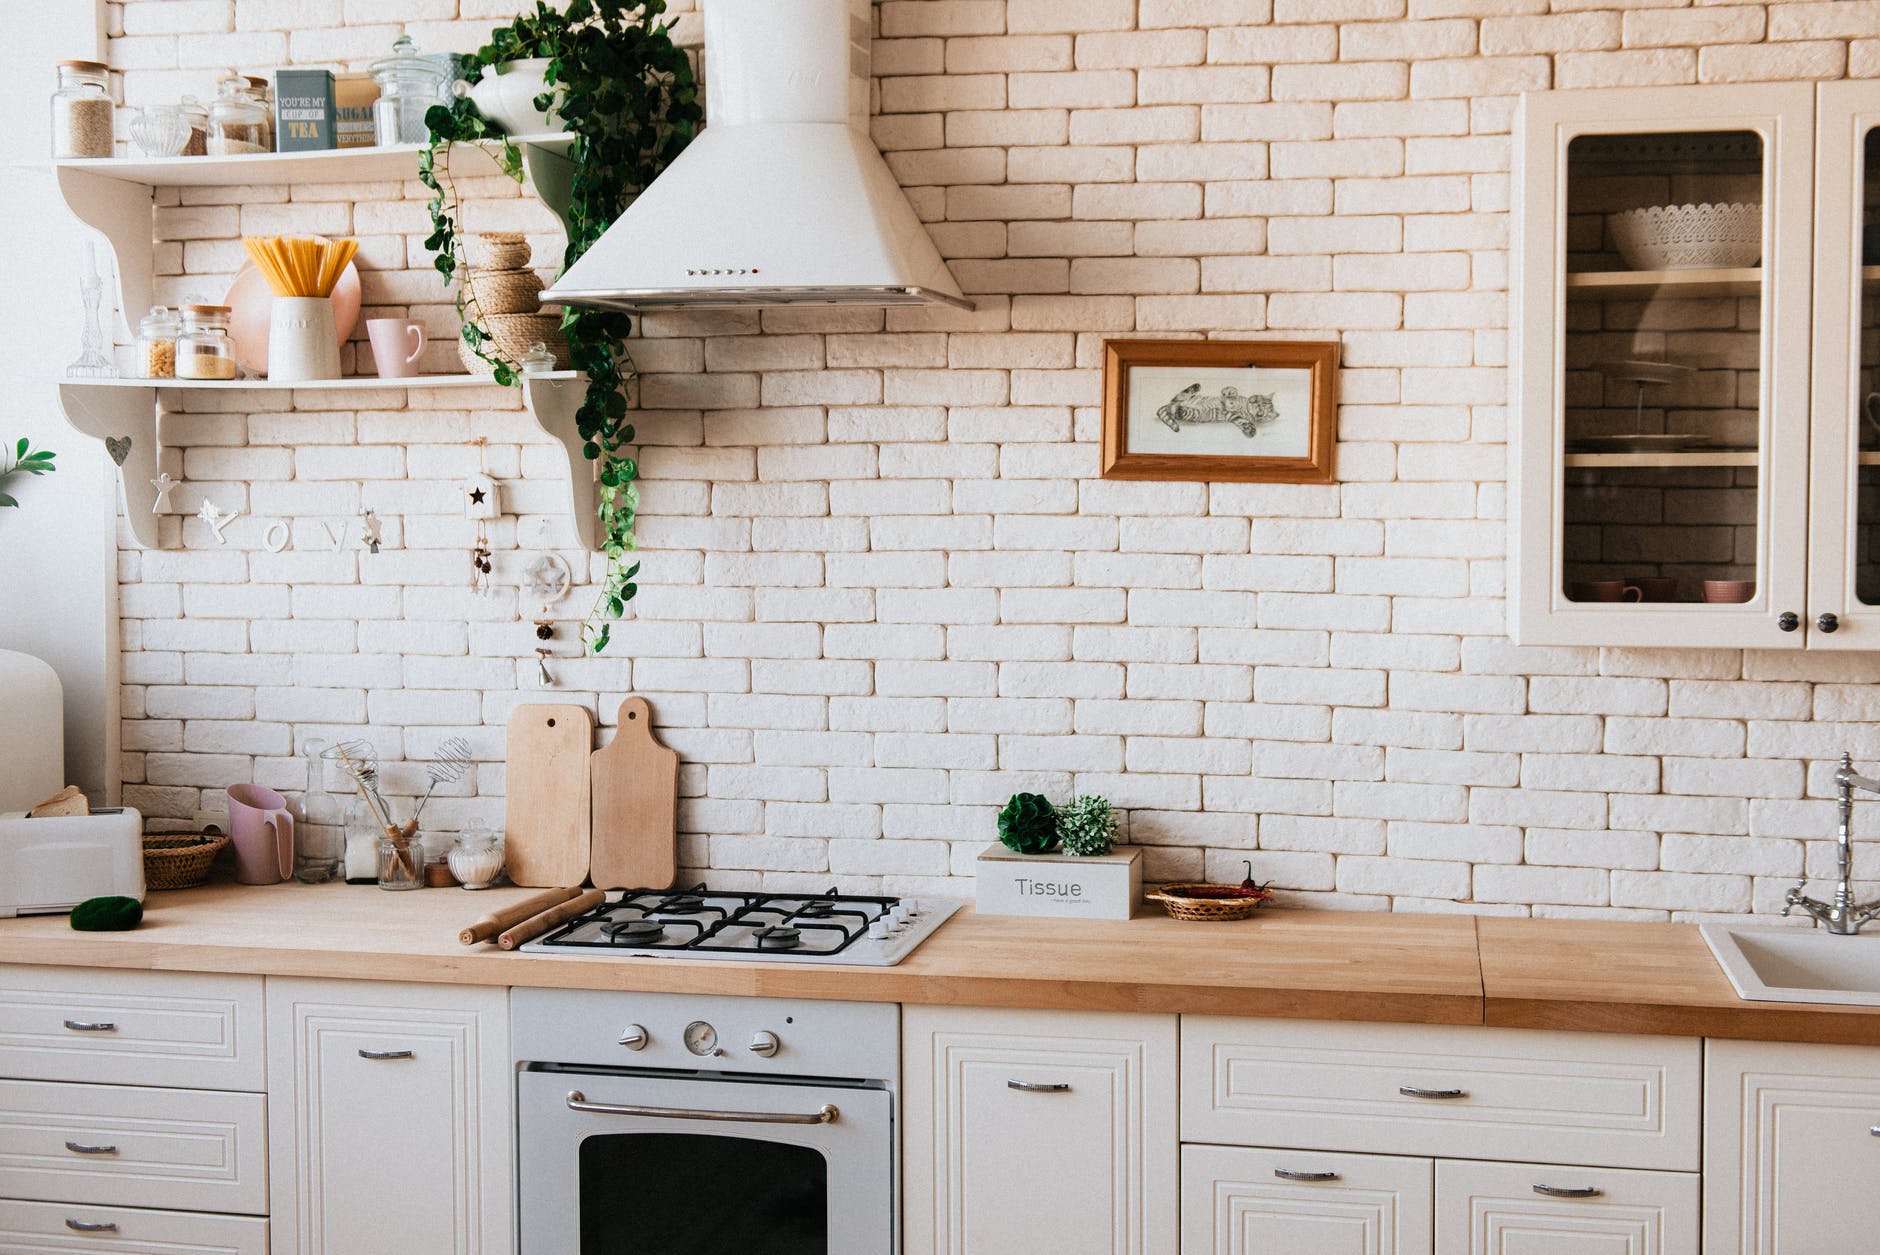 5 Things to Think About When Remodeling Your Kitchen